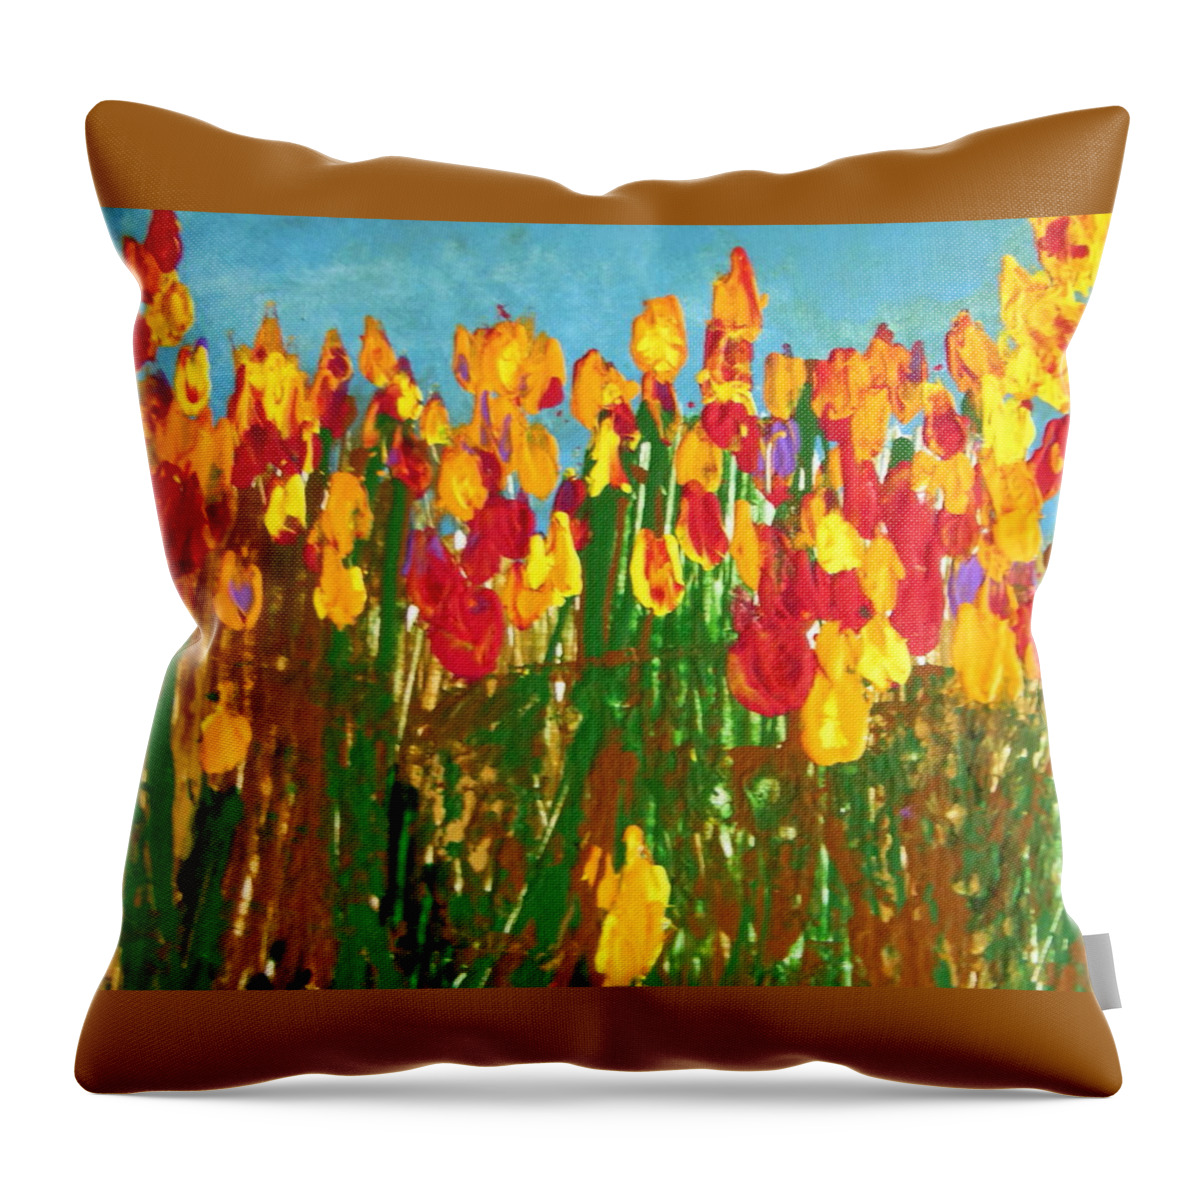 Yellow Throw Pillow featuring the painting All of the Flowers by Aimee Bruno